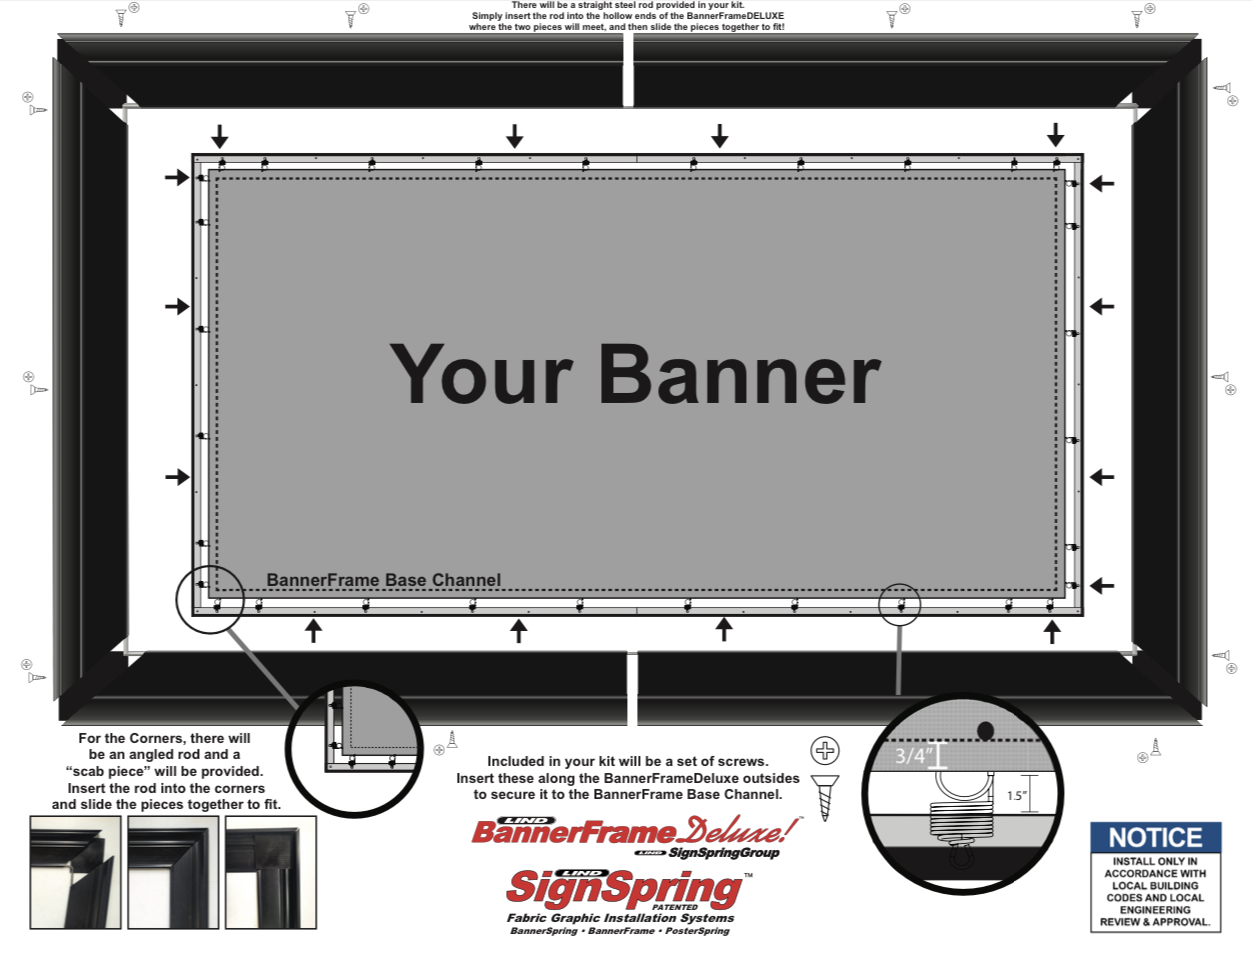 BannerFrame-Deluxe-Product-Design-Graphic Is It Time For A Little Sign Restoration?